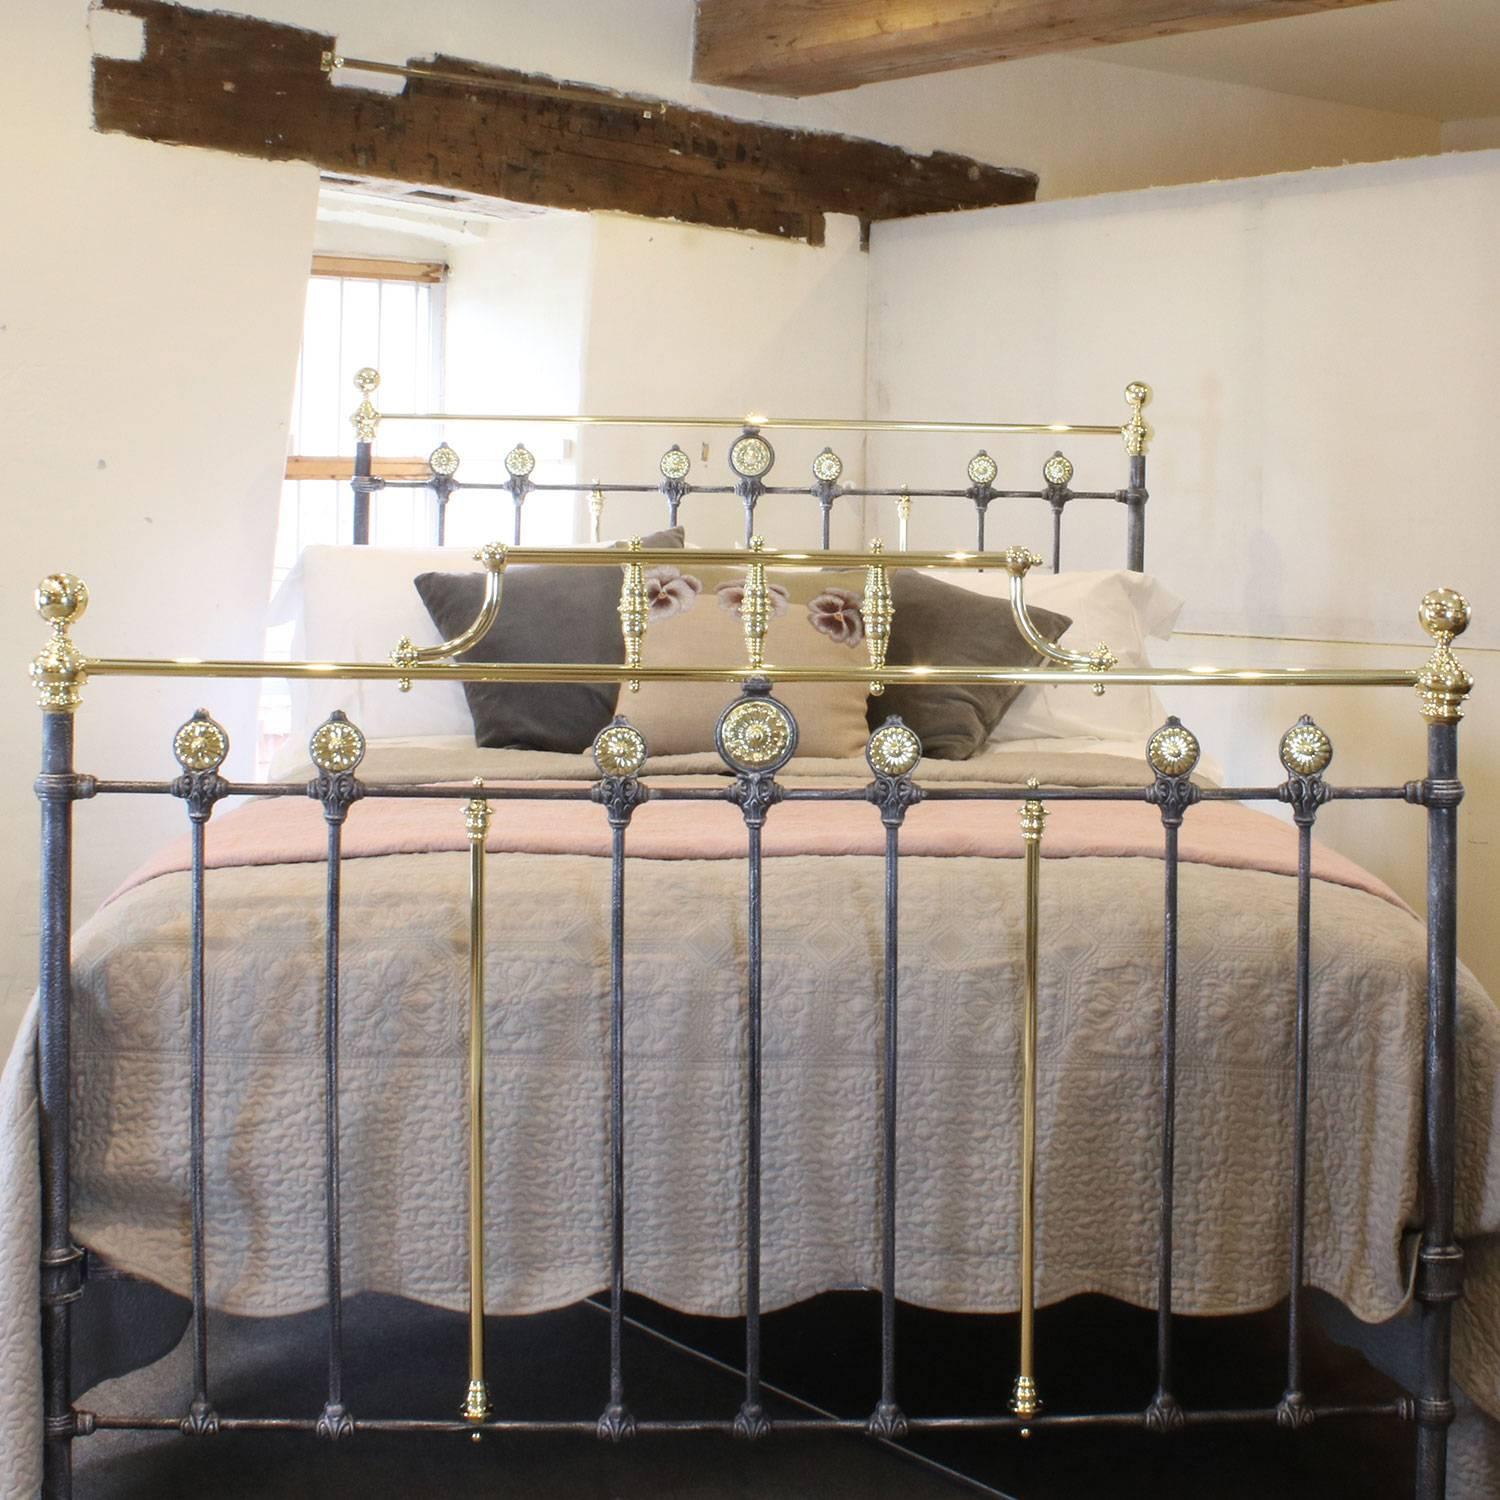 A decorative brass and iron bed in charcoal paint finish adapted from an original Victorian frame.

This bed accepts a British king-size or American queen-size (60 inches, 5 feet or 150 cm) base and mattress set.

The price is for the bed frame